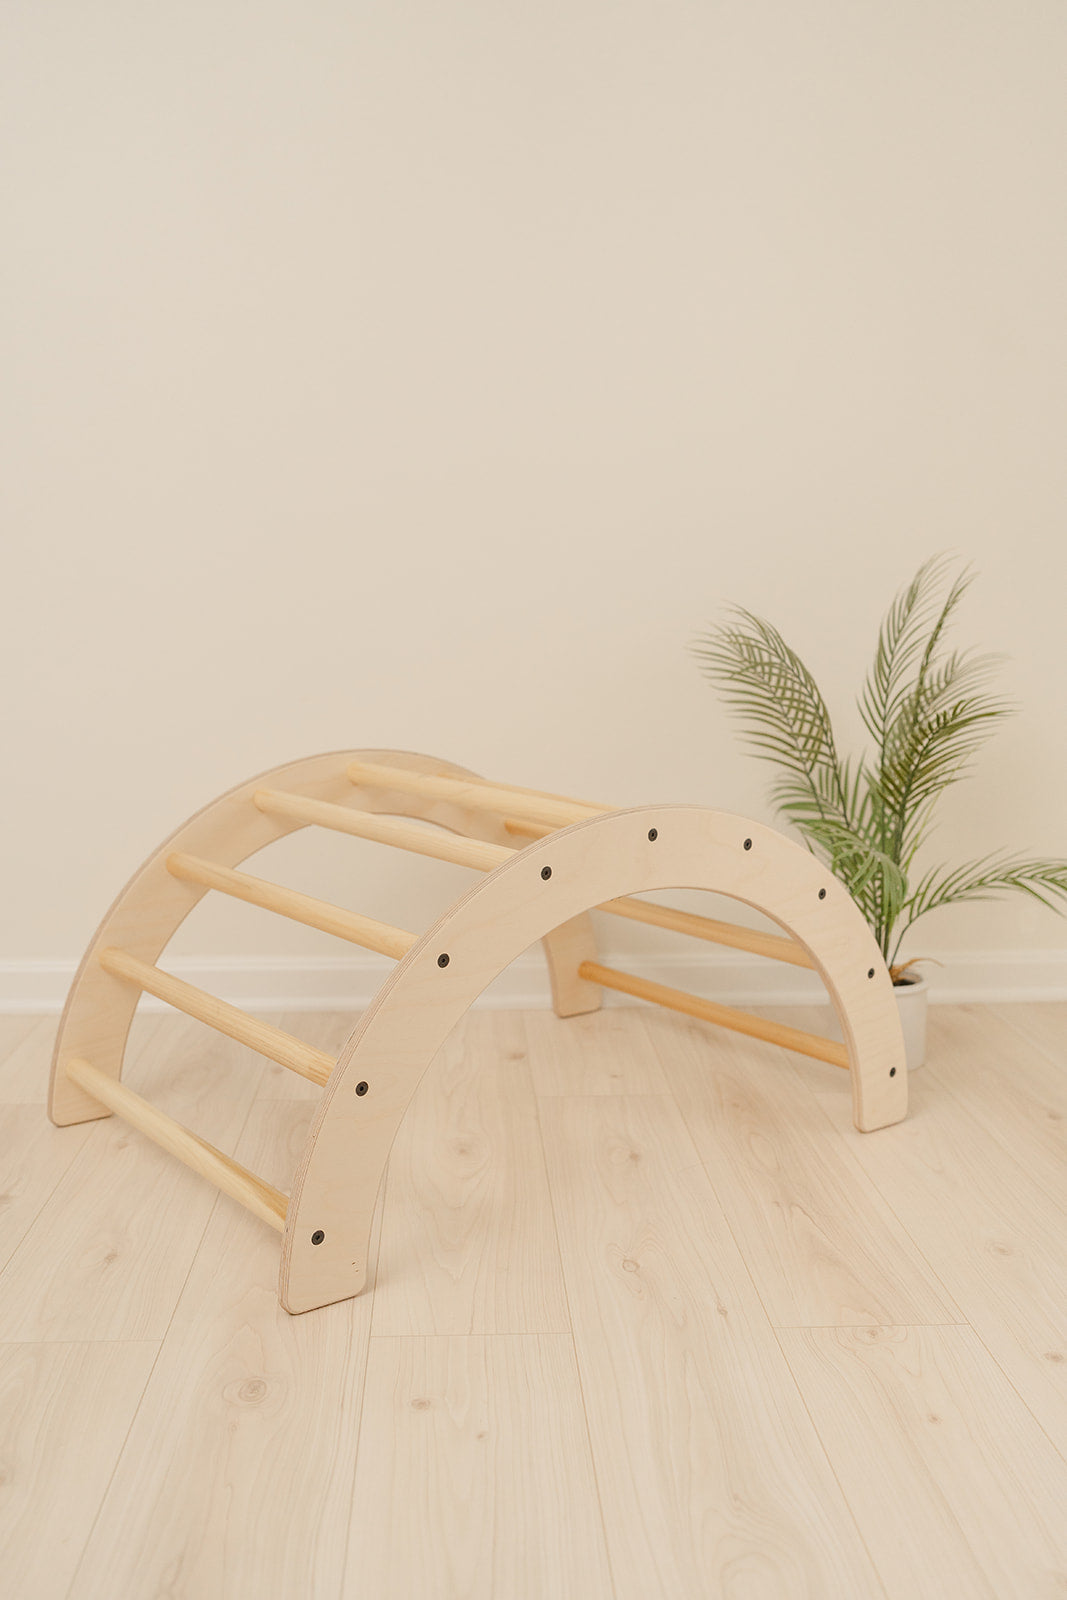 sturdy, minimalist, wooden toddler climbing arch with natural baltic birch wood